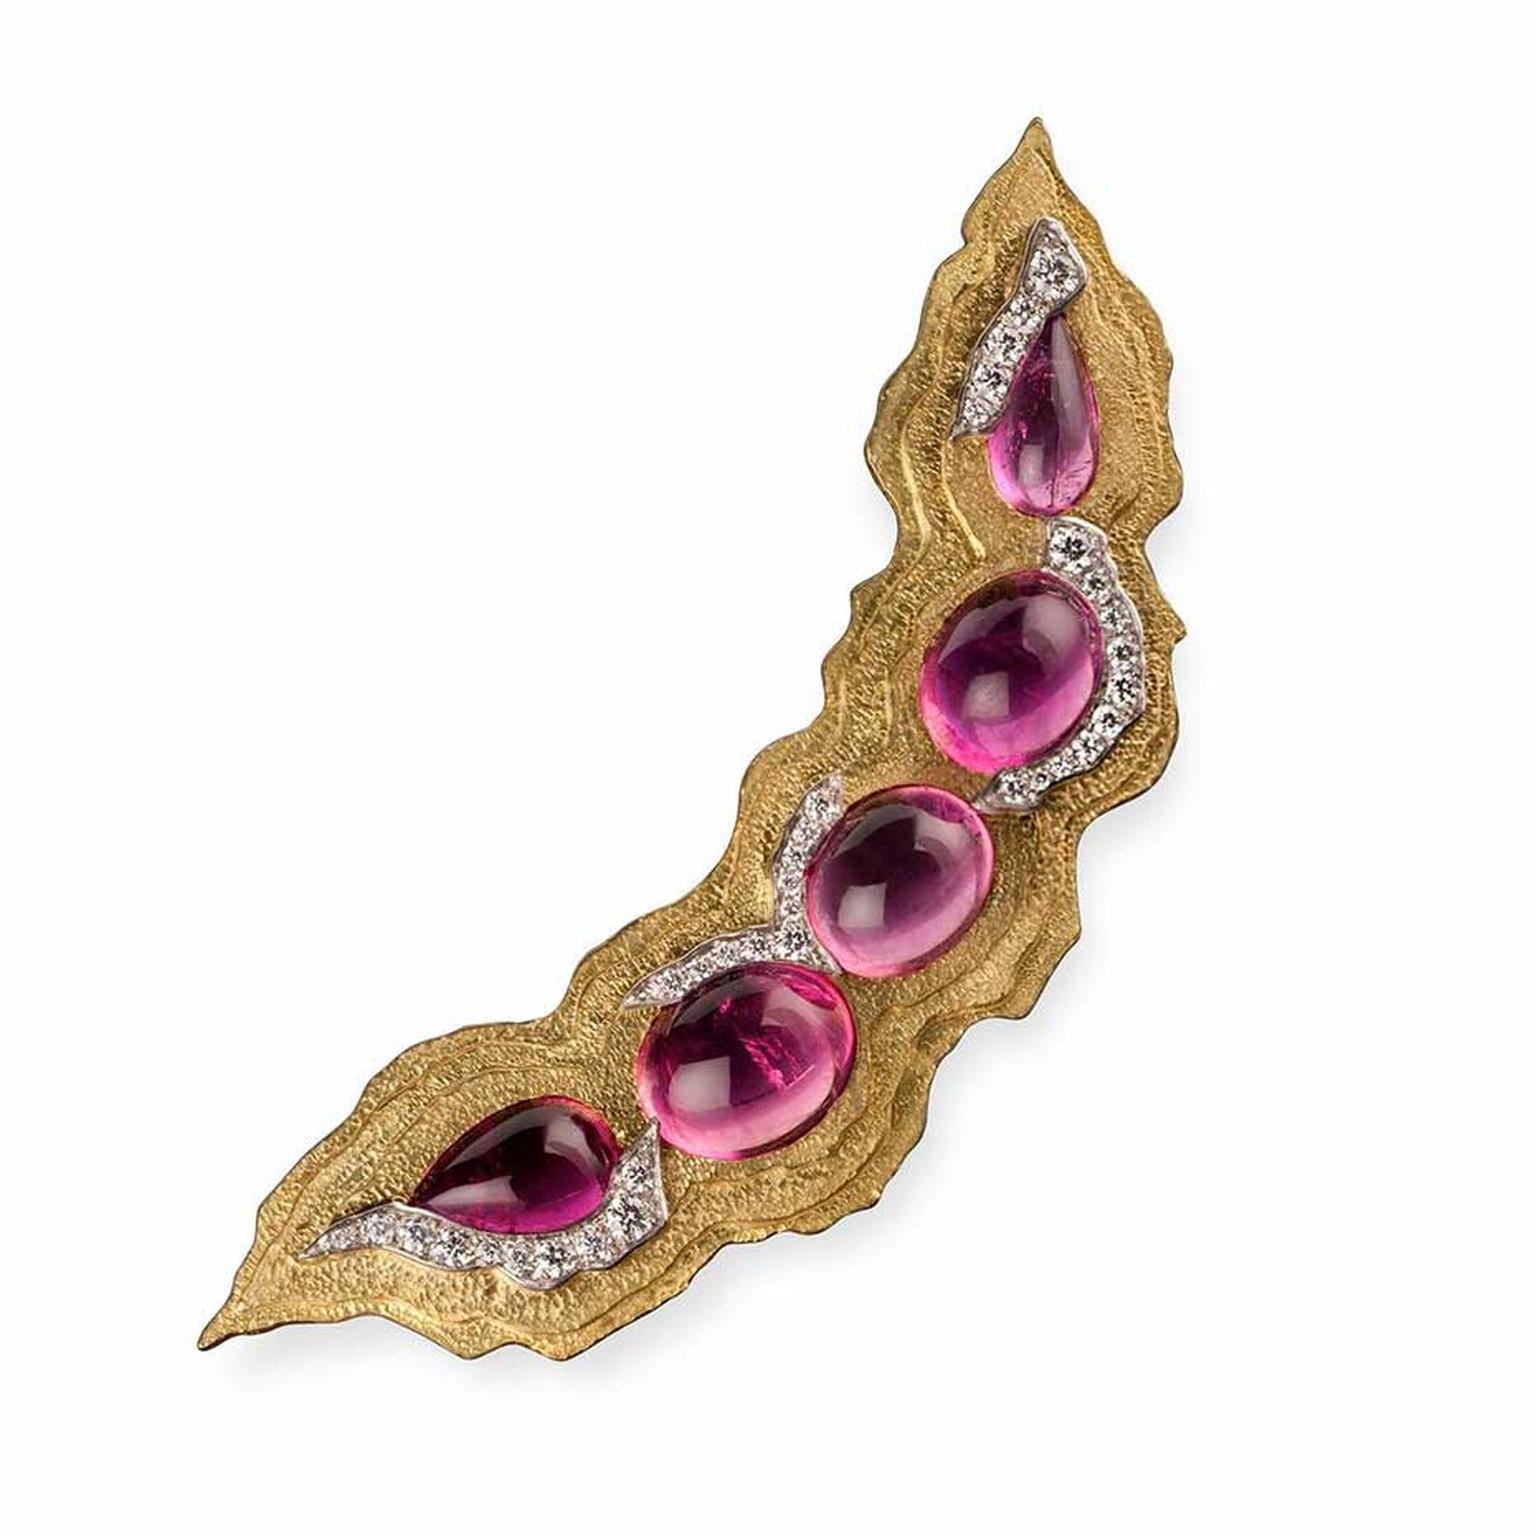 Andrew Grima gold brooch with tourmalines and diamonds